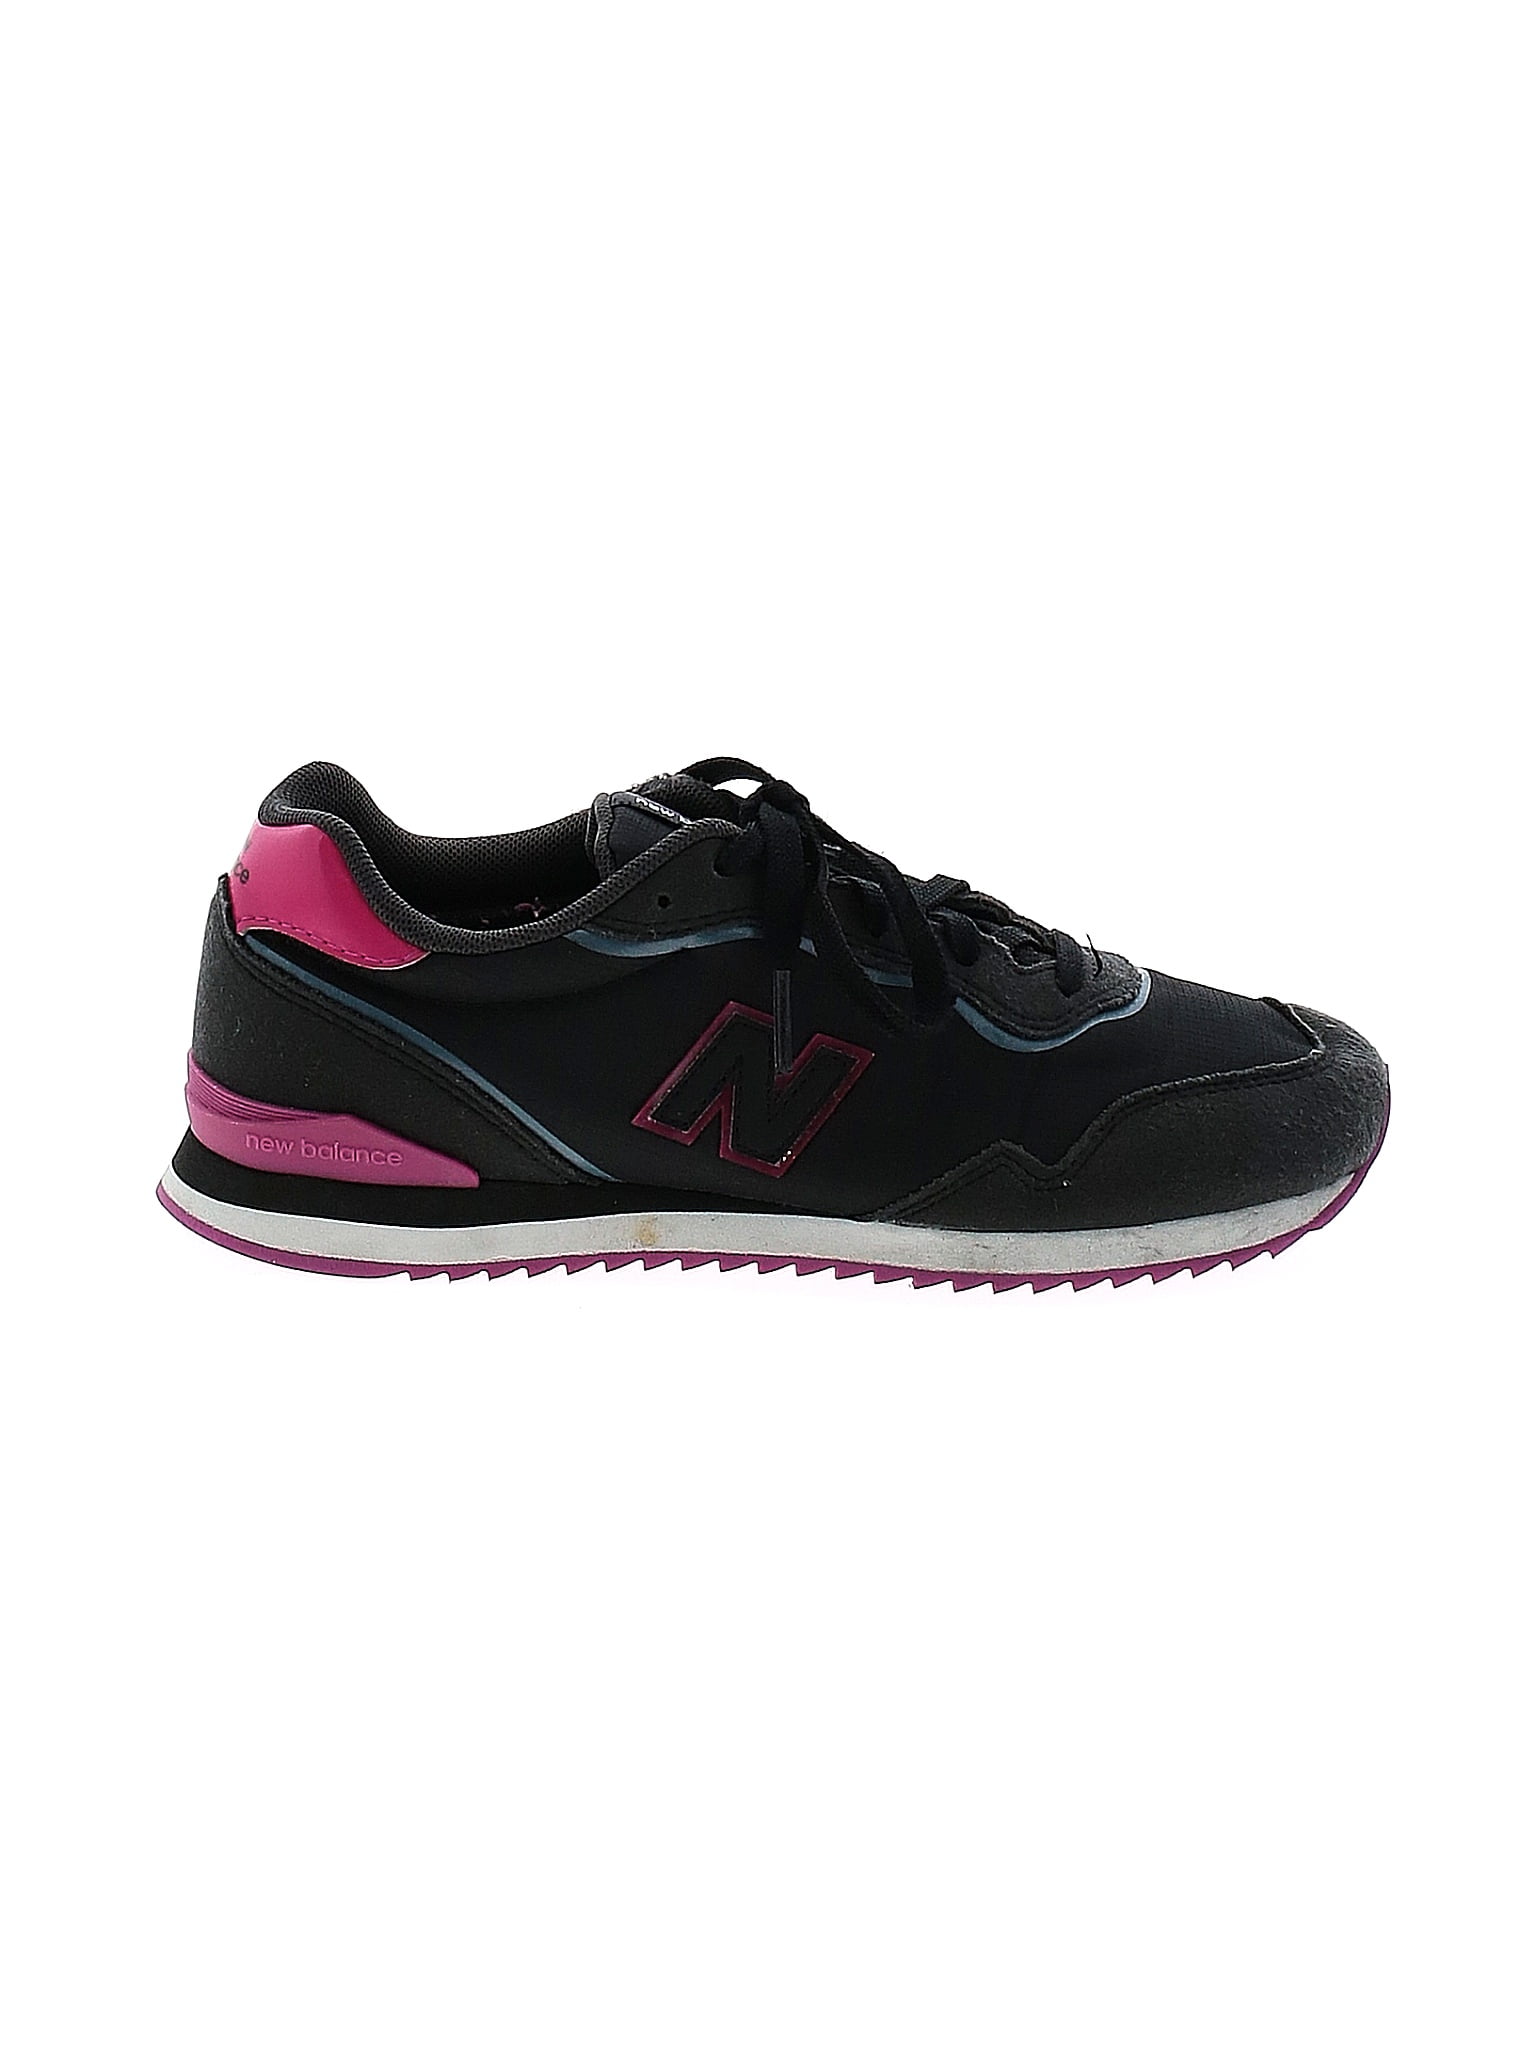 Pre-Owned New Balance Women's Size Sneakers - Walmart.com